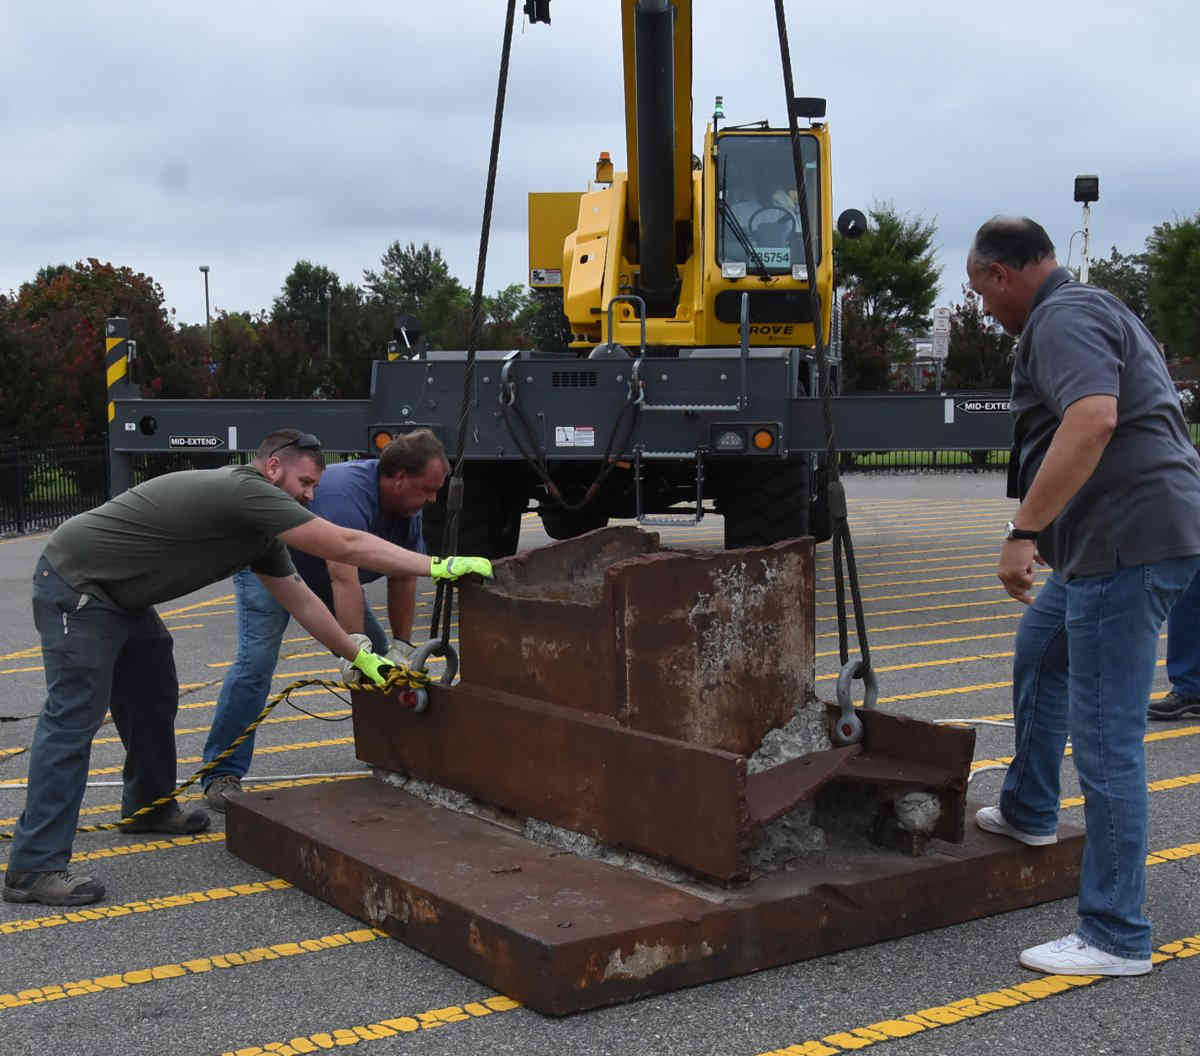 9-11 steel placed at JFK Airport